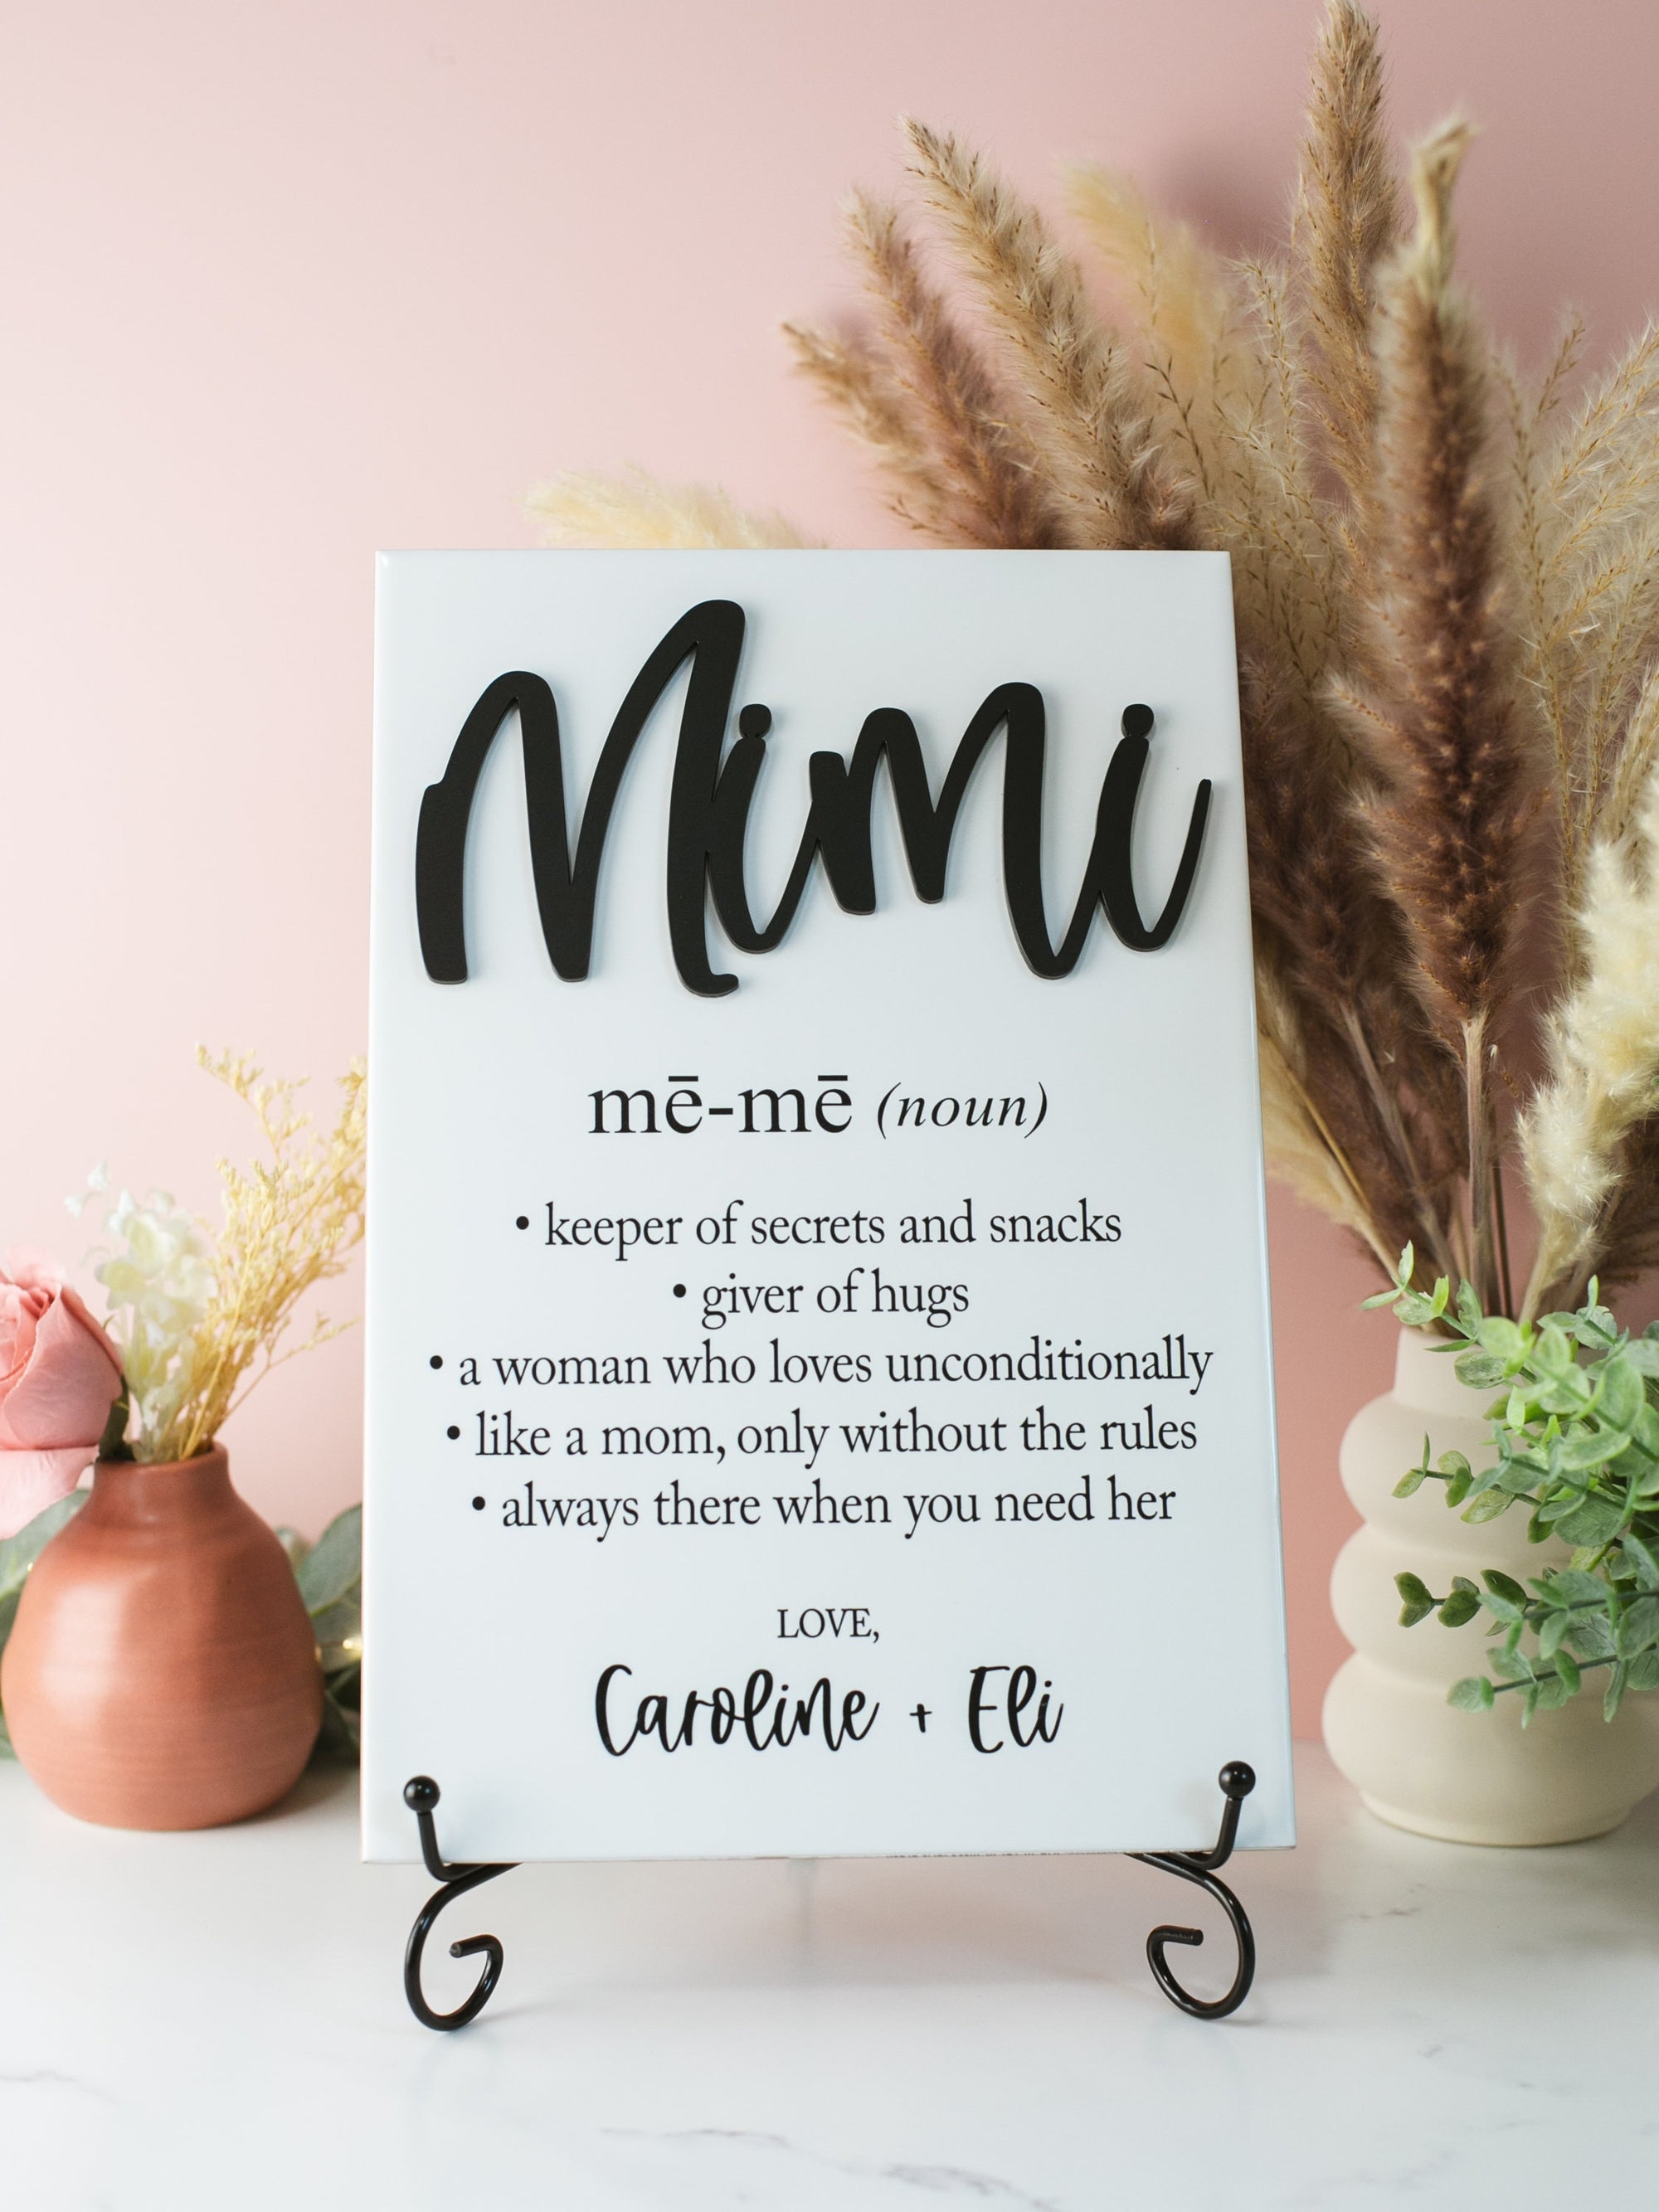 3D Mimi Definition Ceramic Tile Sign Gift, Mothers Day Family Present Idea From Kids, Wall Decor, Nana, Gigi and Grandma Also Available